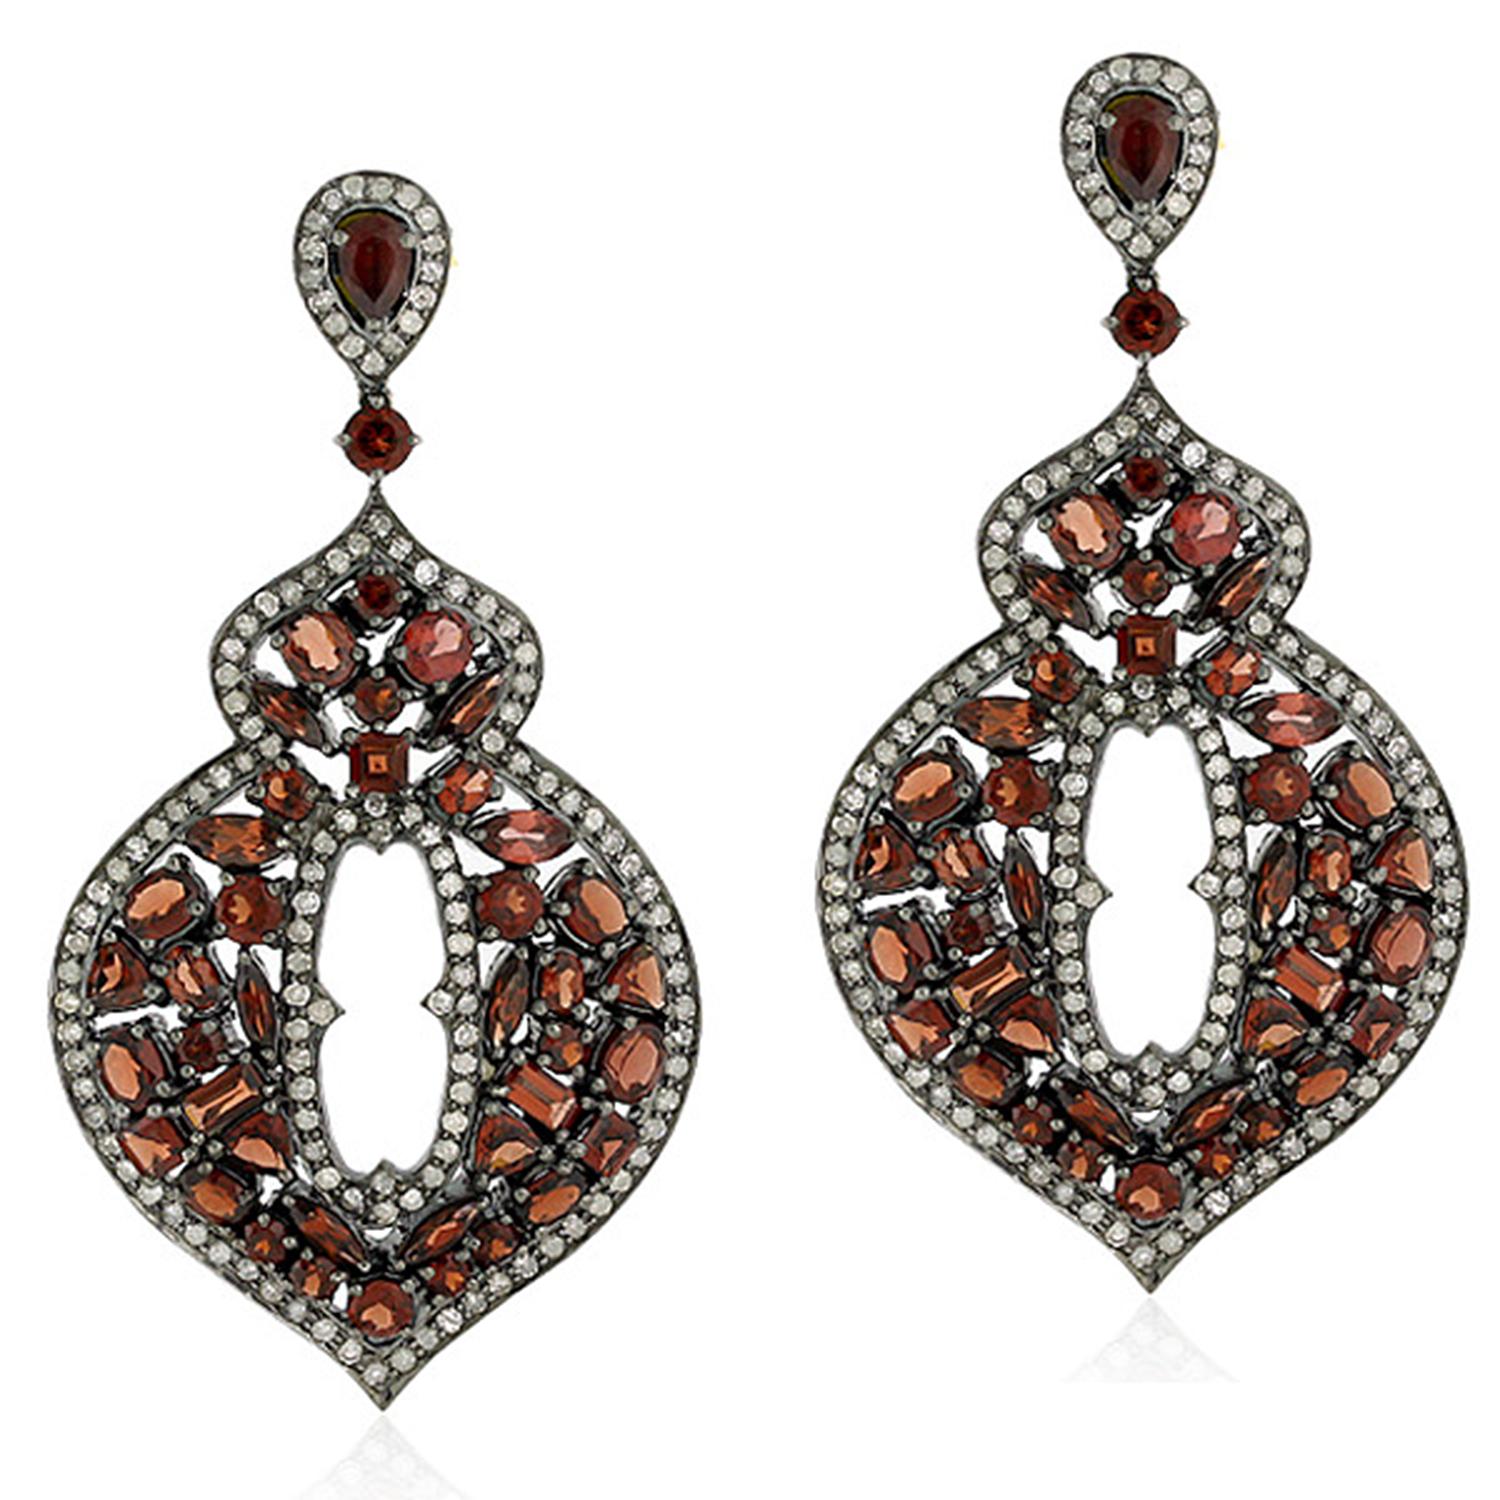 Mixed Cut Mixed Shaped Red Garnet Earrings Adorned with Diamonds In 18k Gold & Silver For Sale